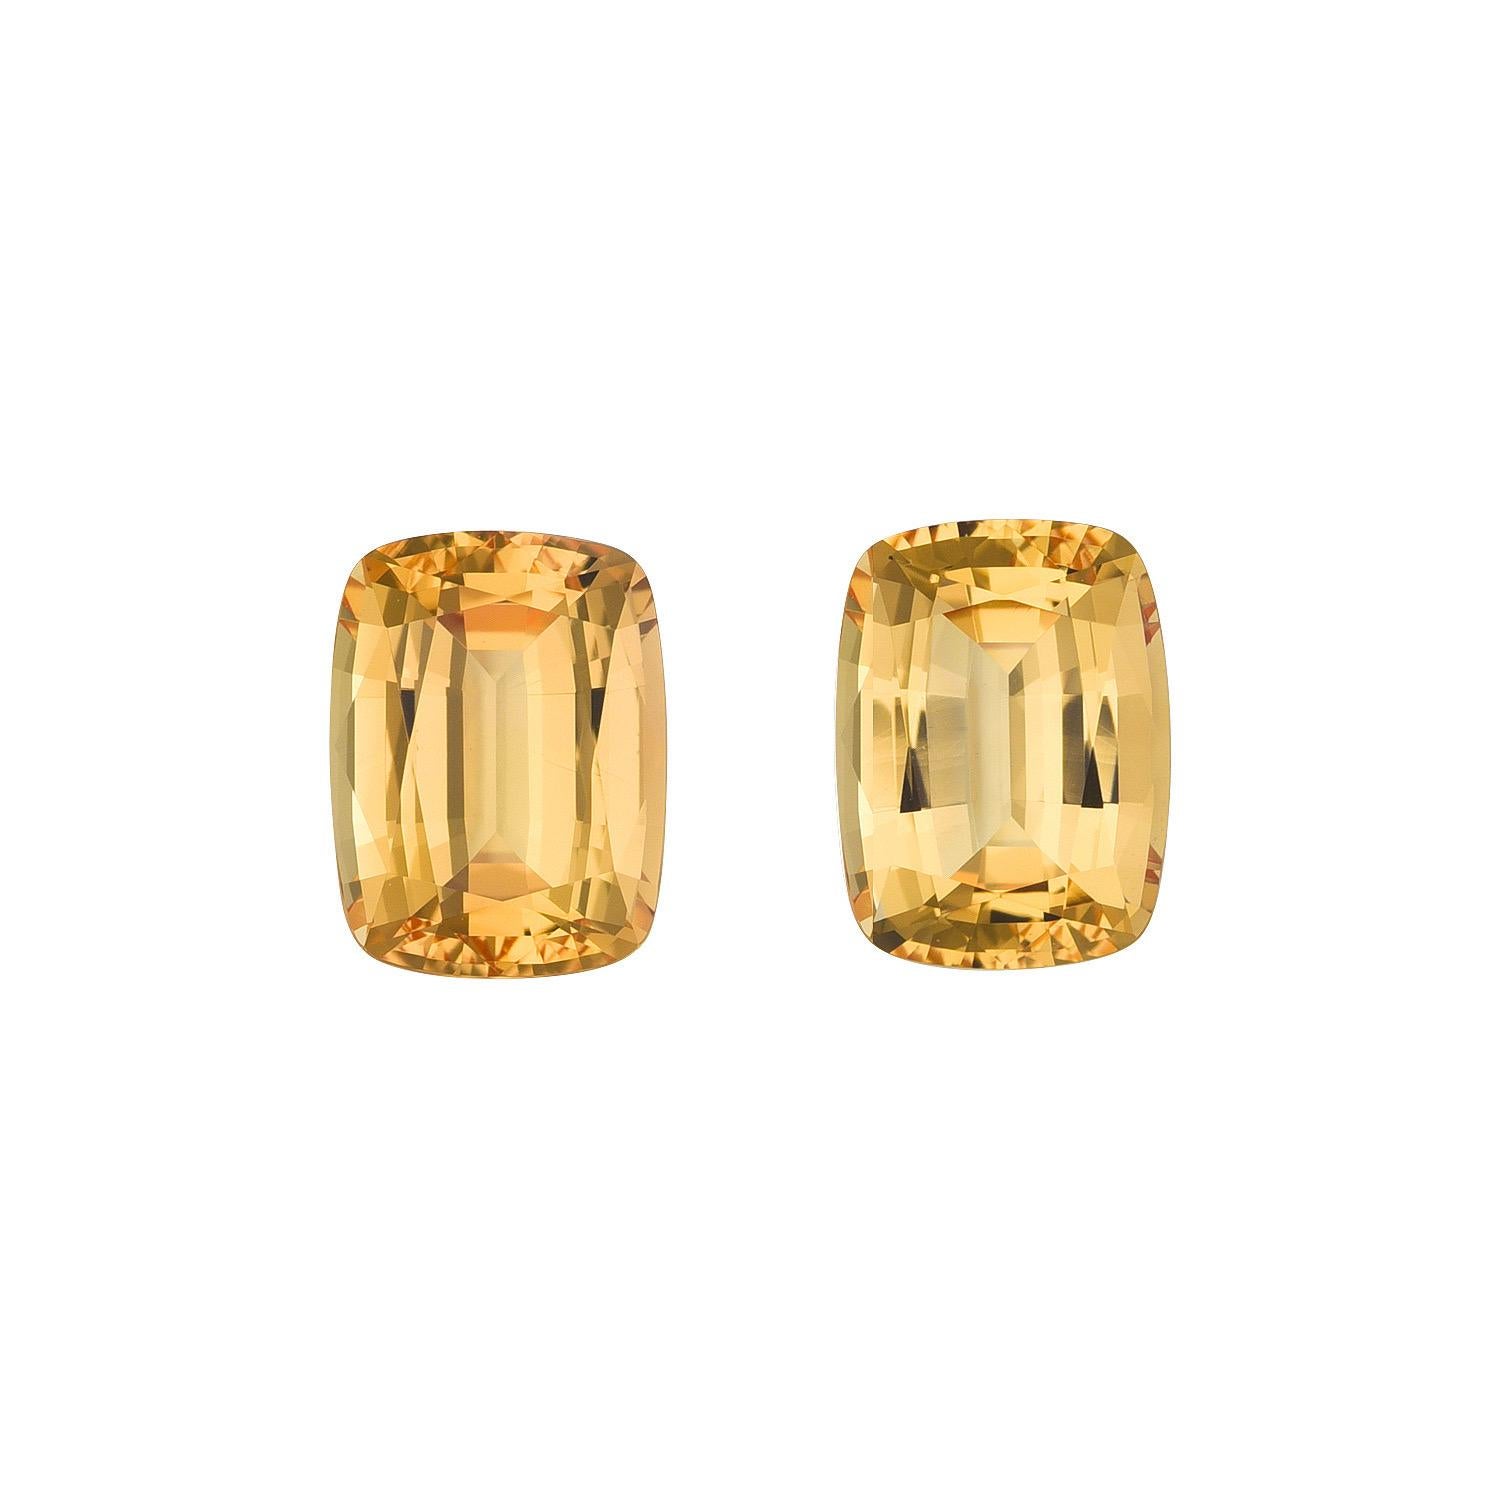 Bright 3.36 carat Brazilian Imperial Topaz pair of cushion loose gemstones, offered unmounted to someone special.
Dimensions: 8 x 6 x 4 mm.
Returns are accepted and paid by us within 7 days of delivery.
We offer supreme custom jewelry work upon